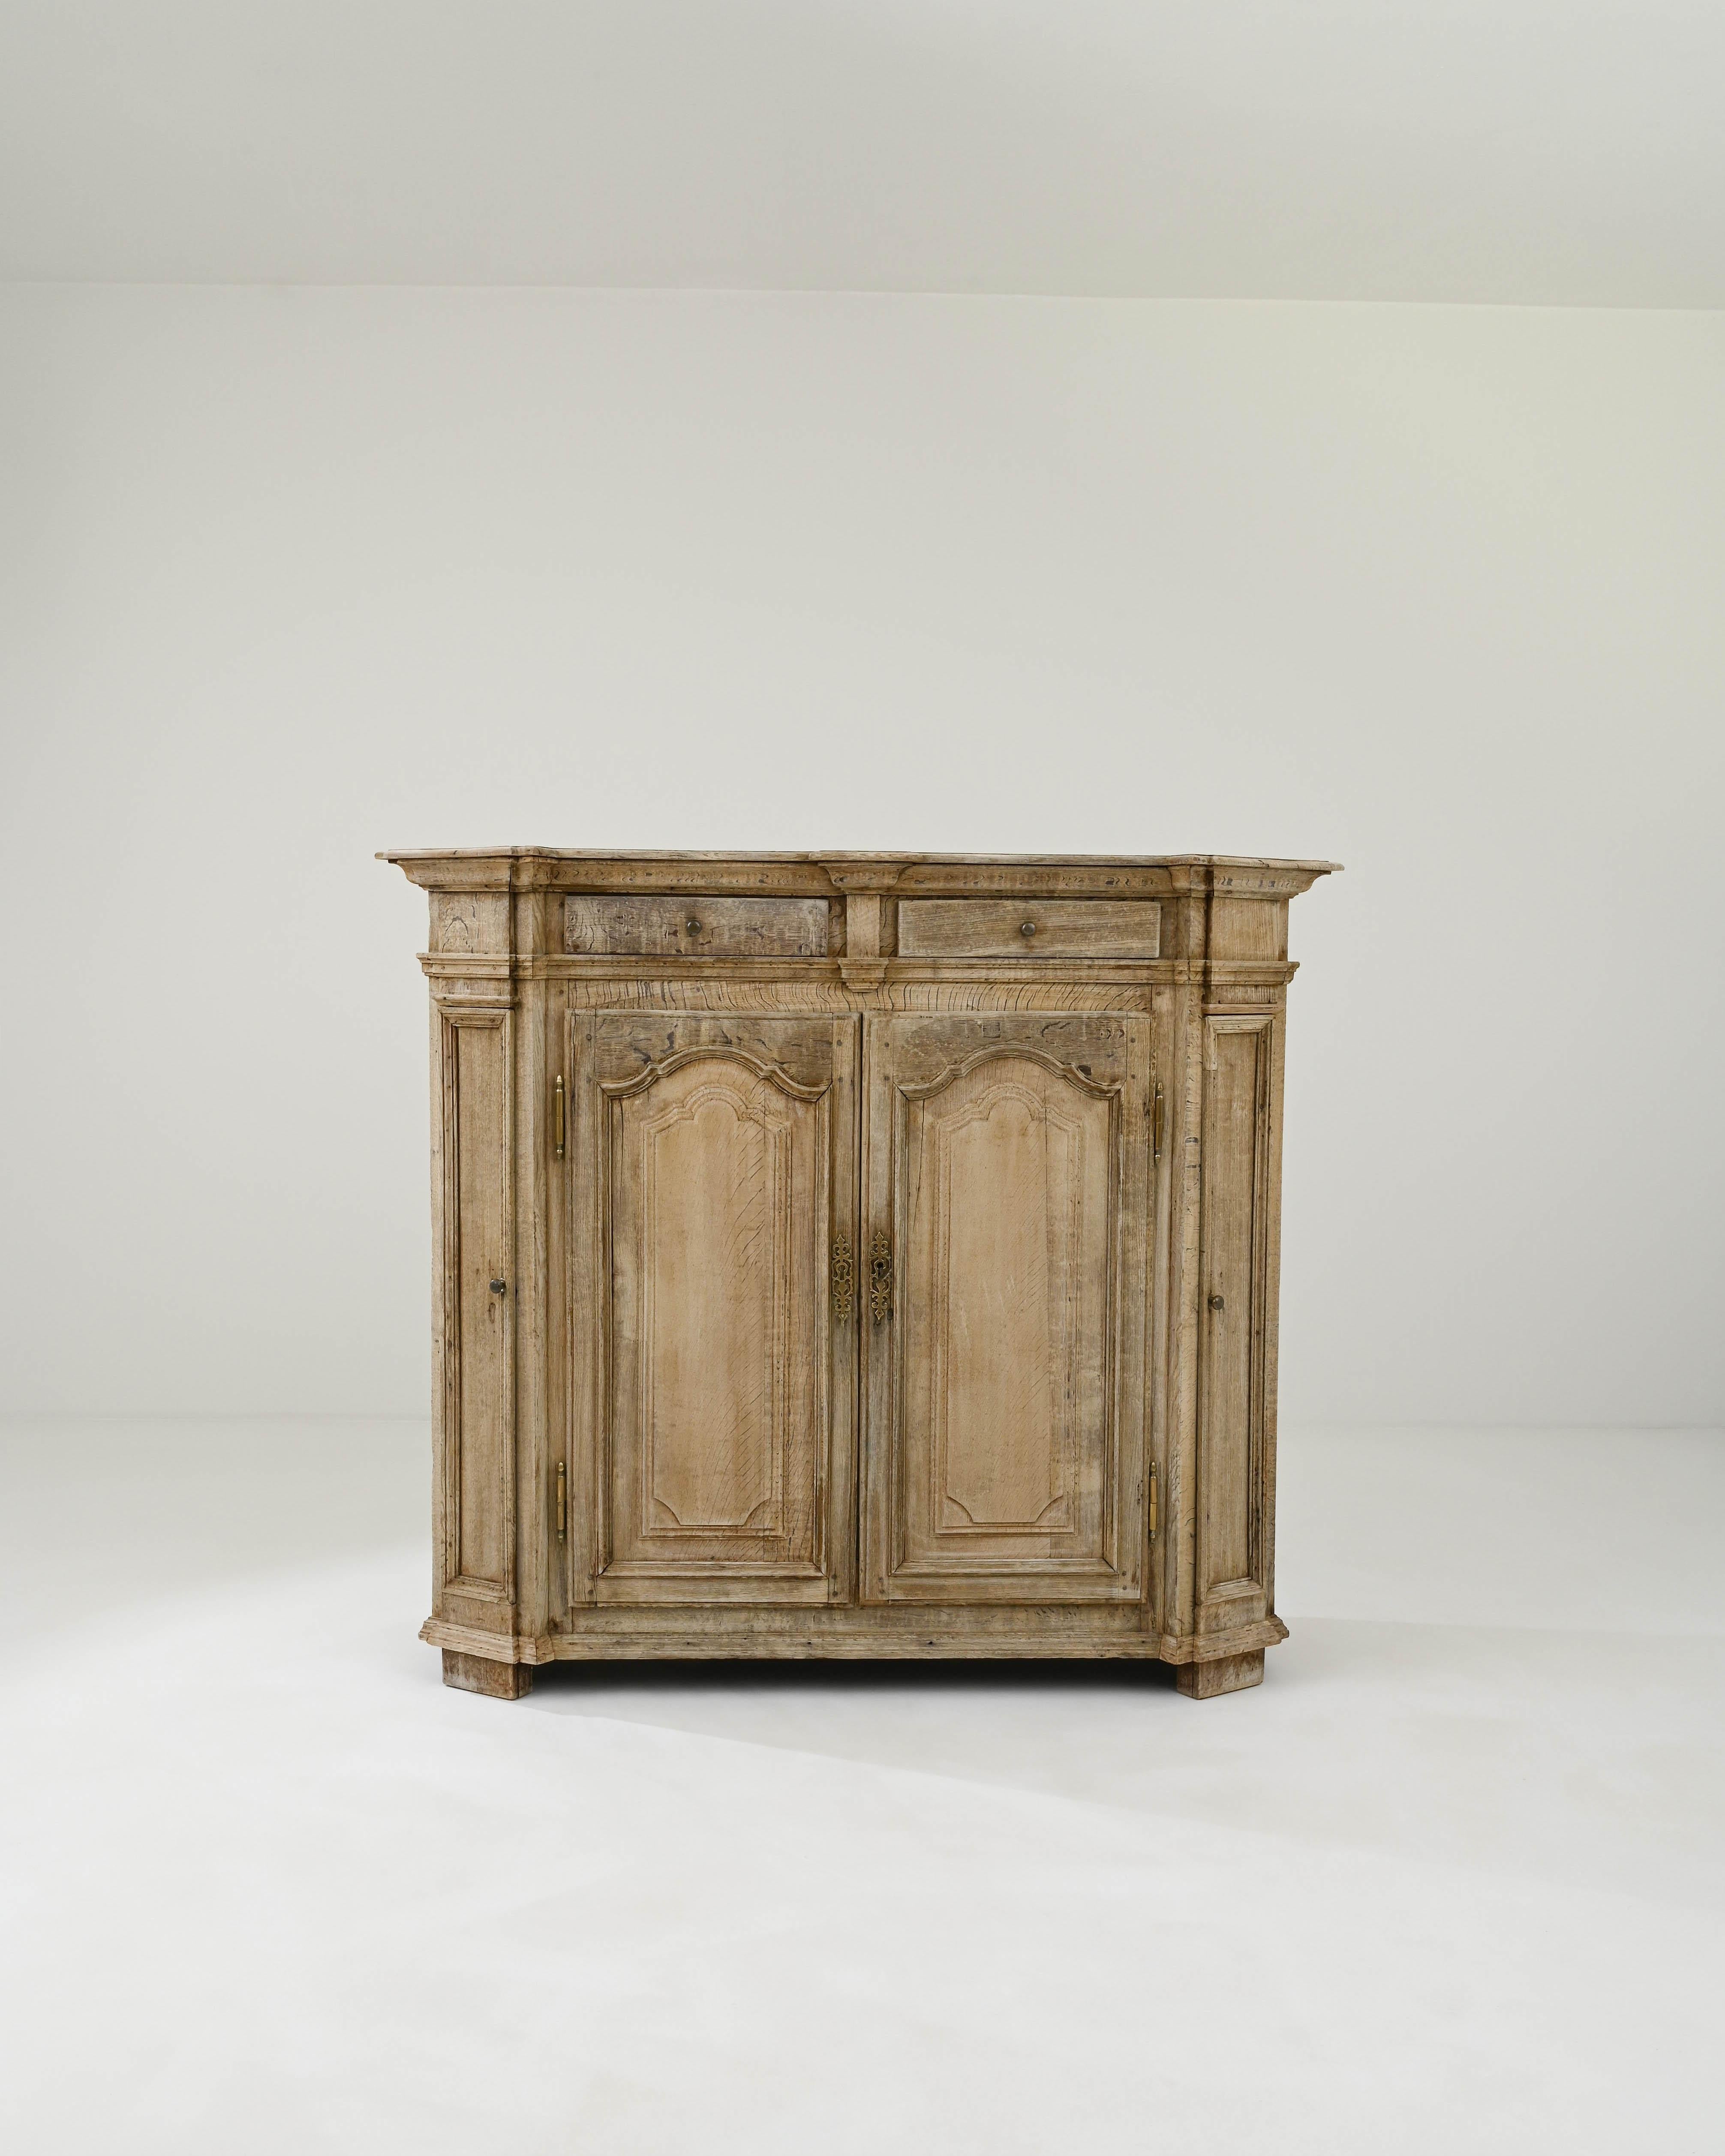 Timeless craftsmanship and the beautiful finish of the natural oak make this antique buffet a find to treasure. Hand-built in Belgium in the 1800s, discreet decorative accents bring personality to the spacious cabinet. The ogee peaks of the arched